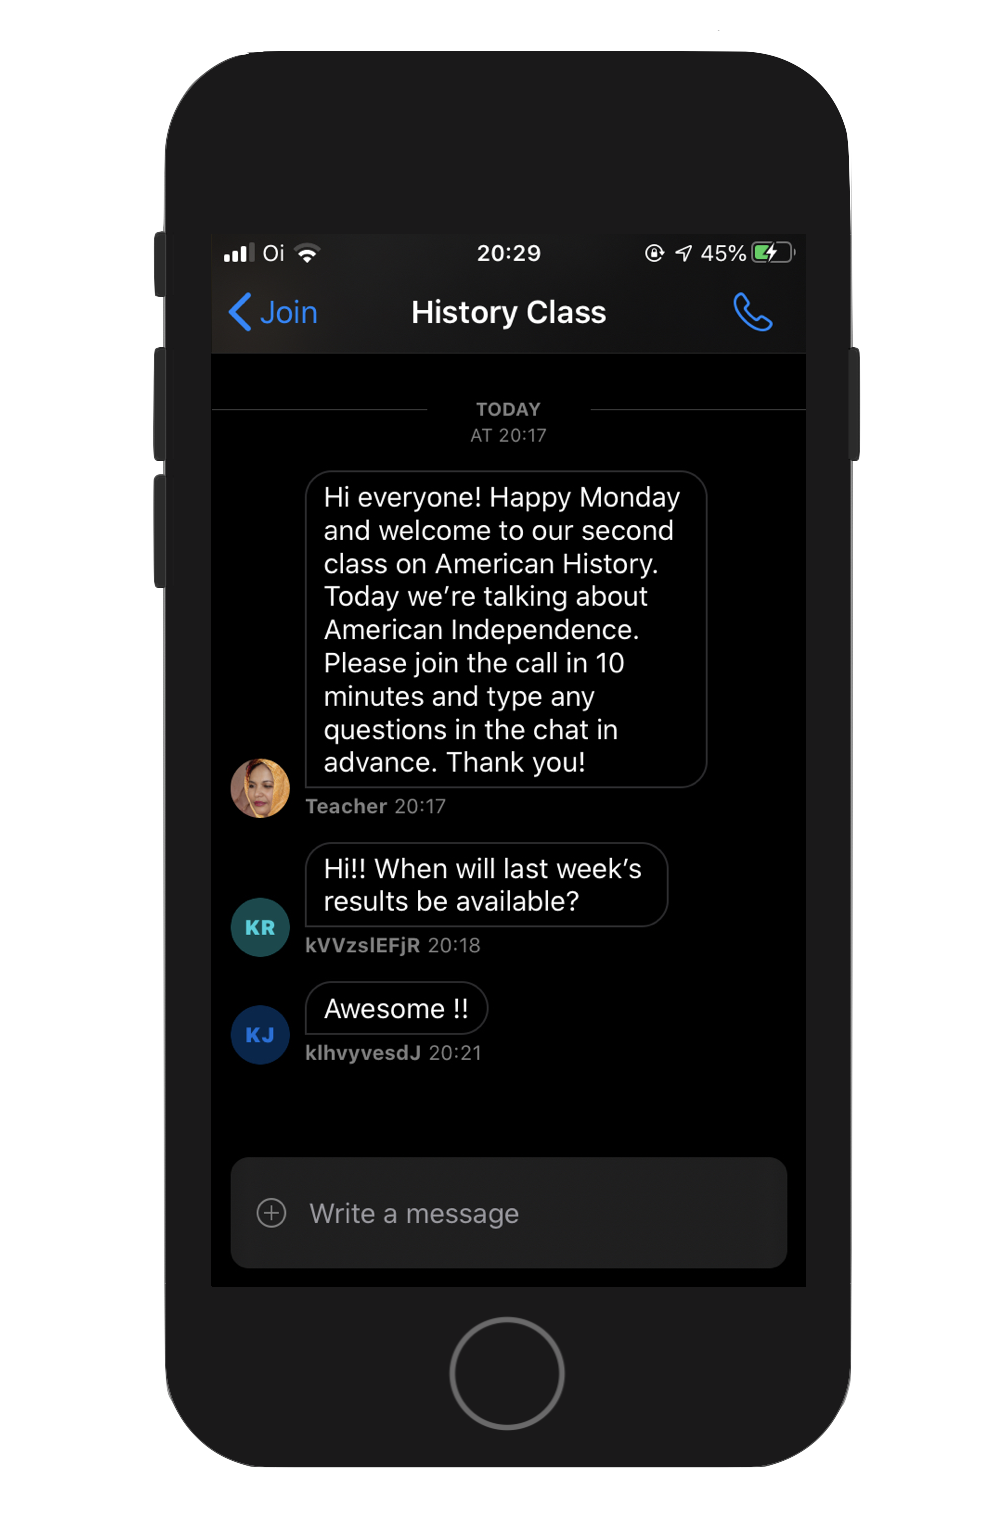 Image shows a screenshot of a conversation in a chat screen with students and a teacher